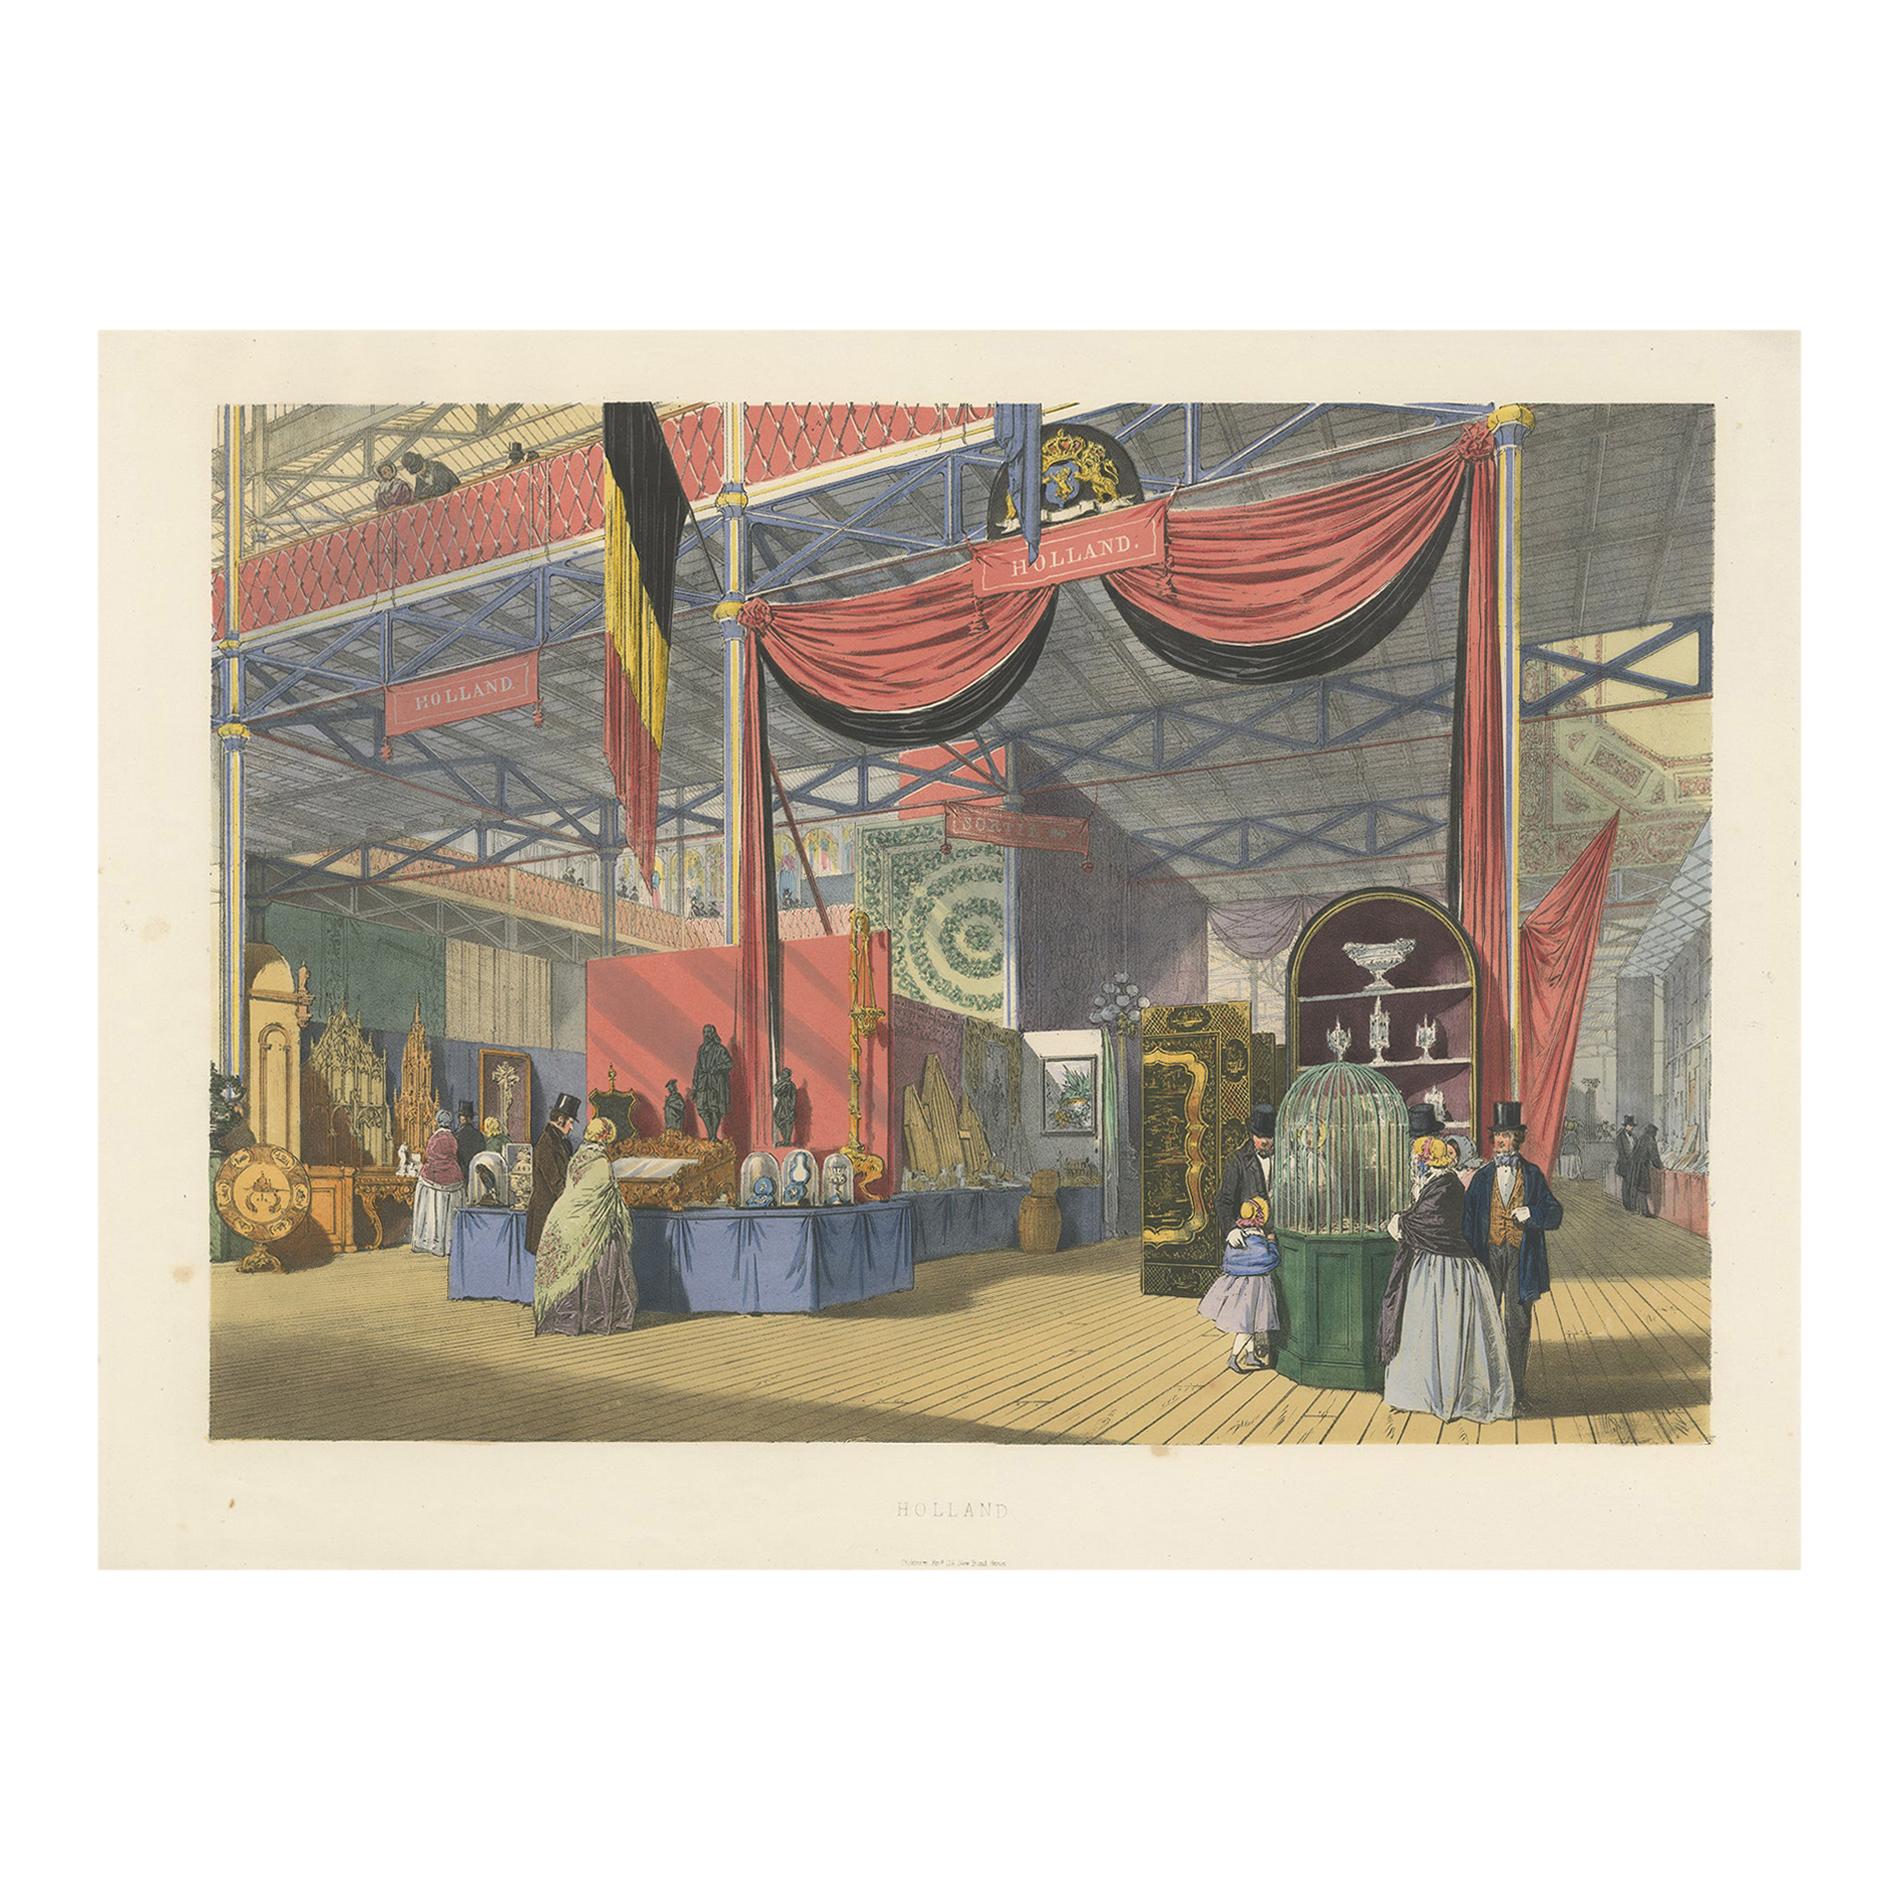 Antique Print of the Dutch Stand at the Great Exhibition by Dickinson '1854'